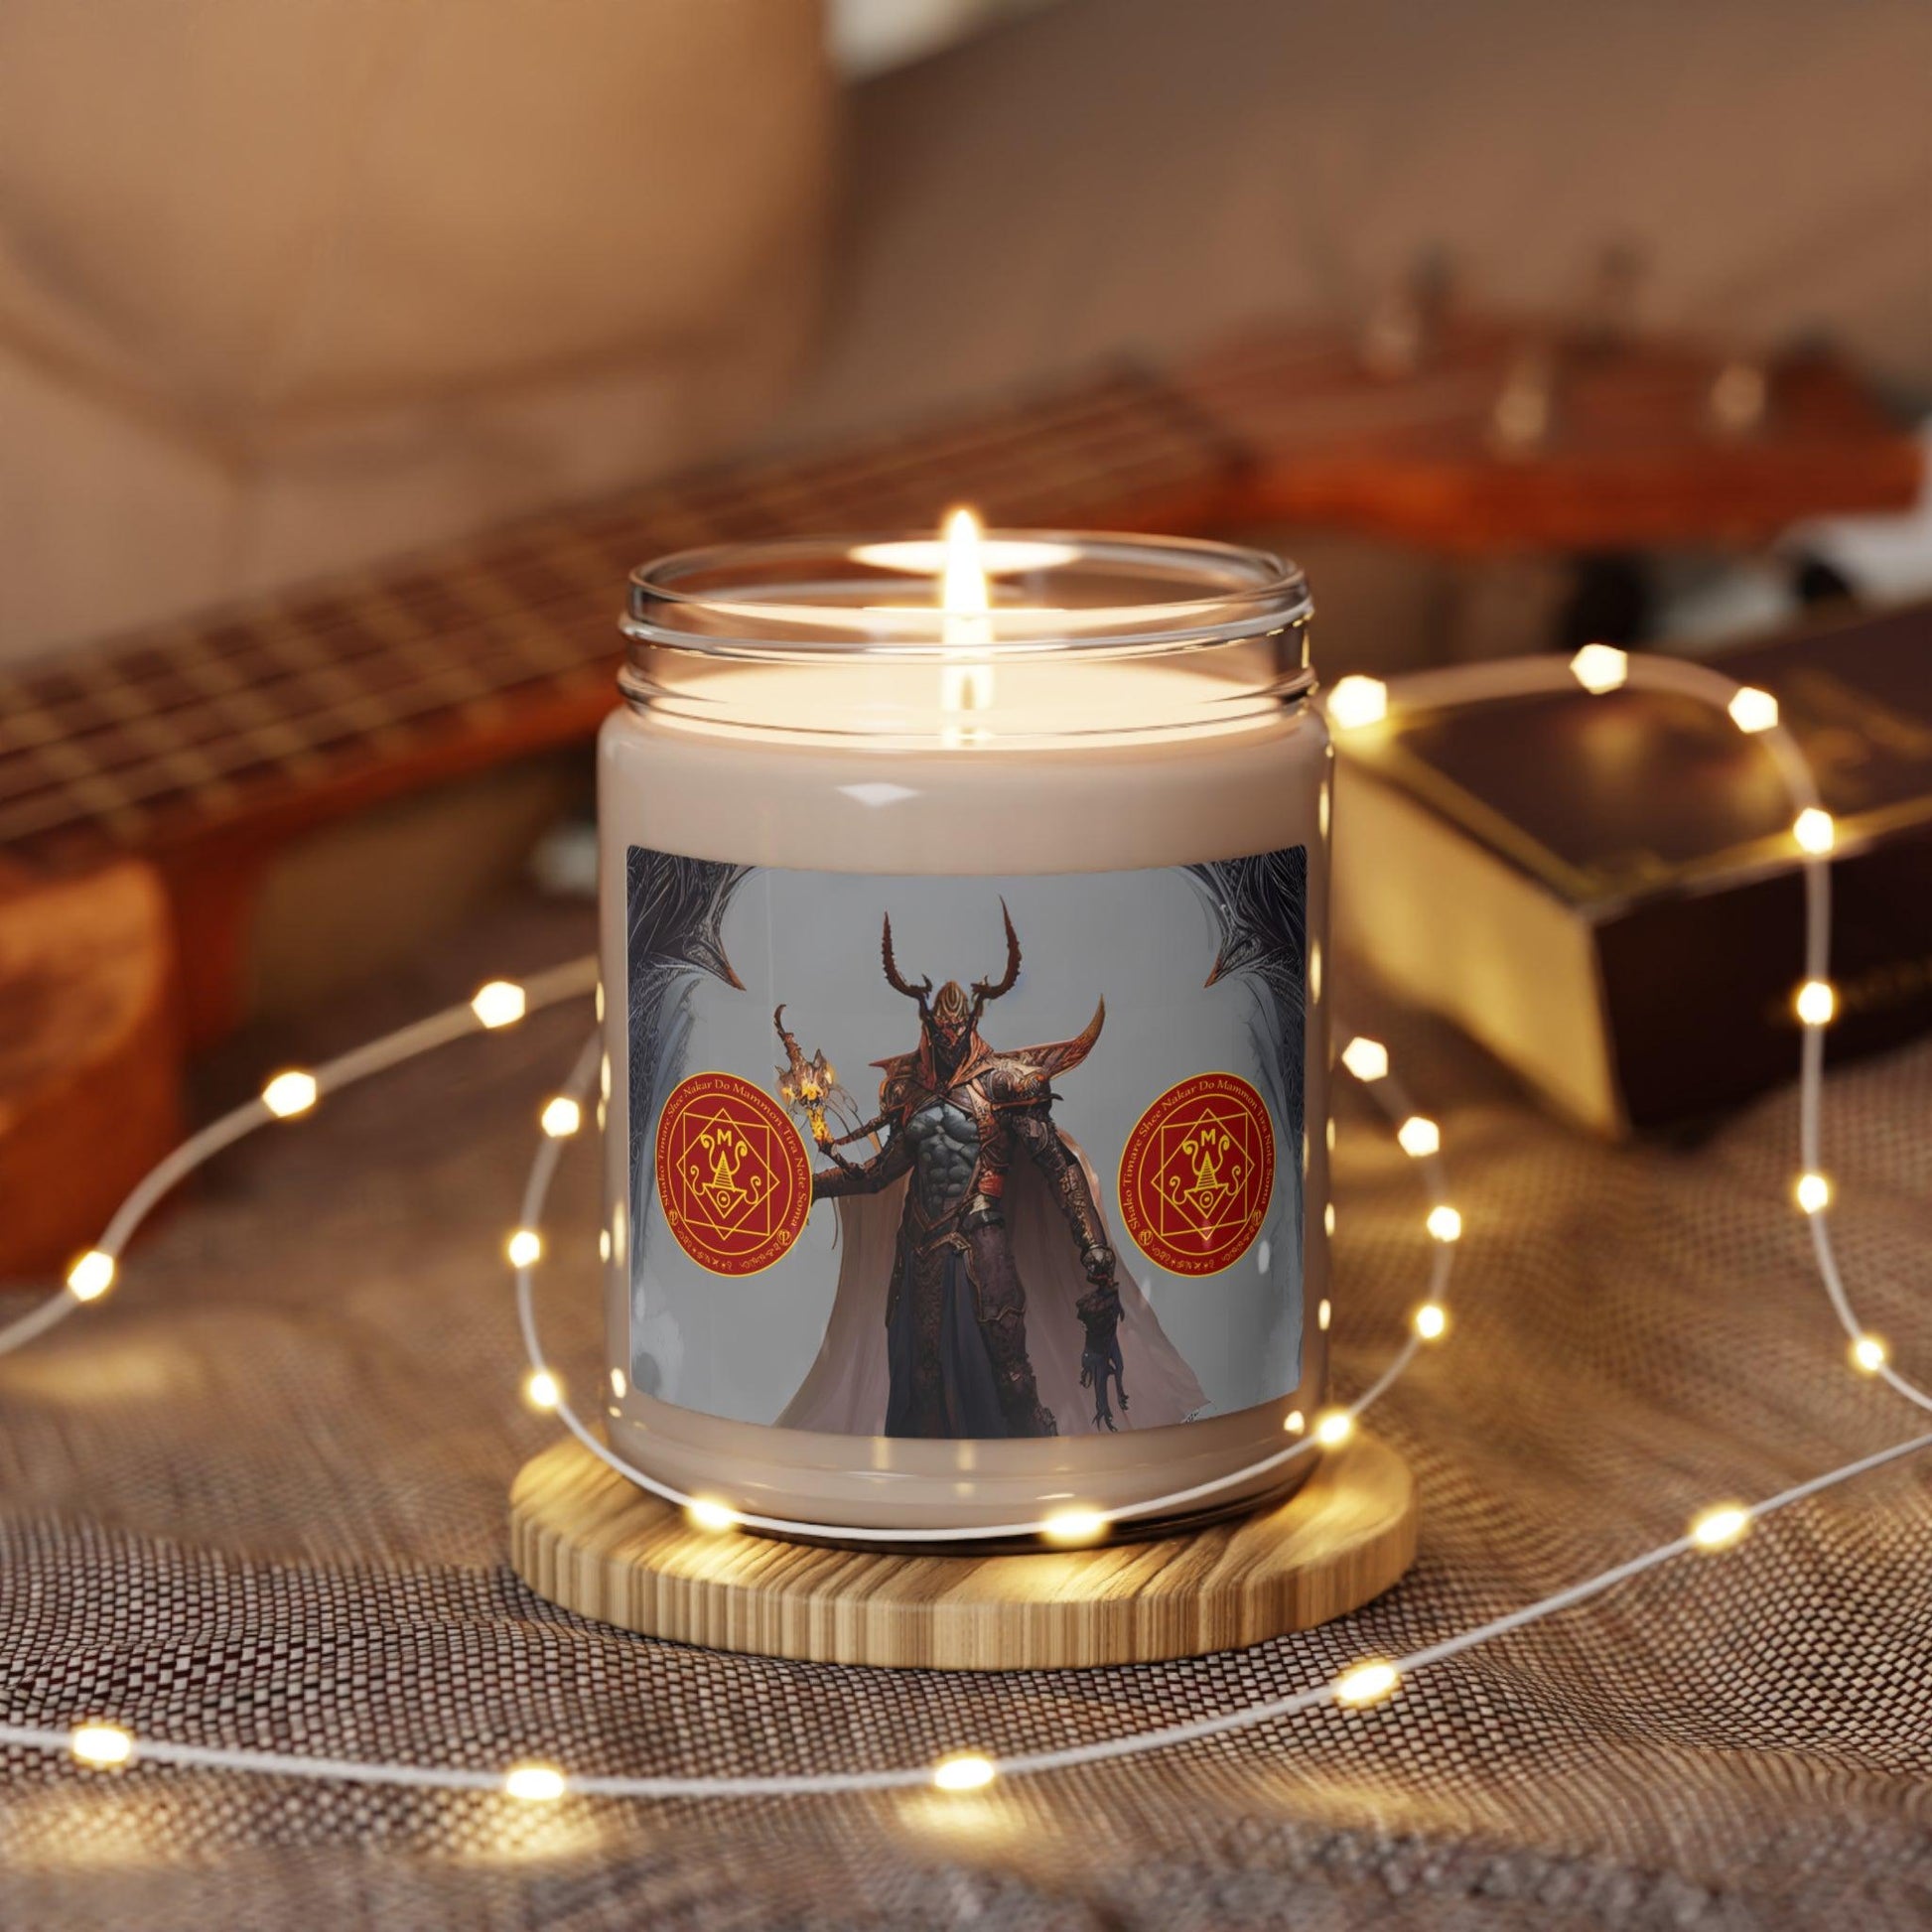 Demon-Mammon-Altar-Scented-Soy-Candle-for-Money-related-offerings-rituals-initiations-or-praying-and-meditation-18